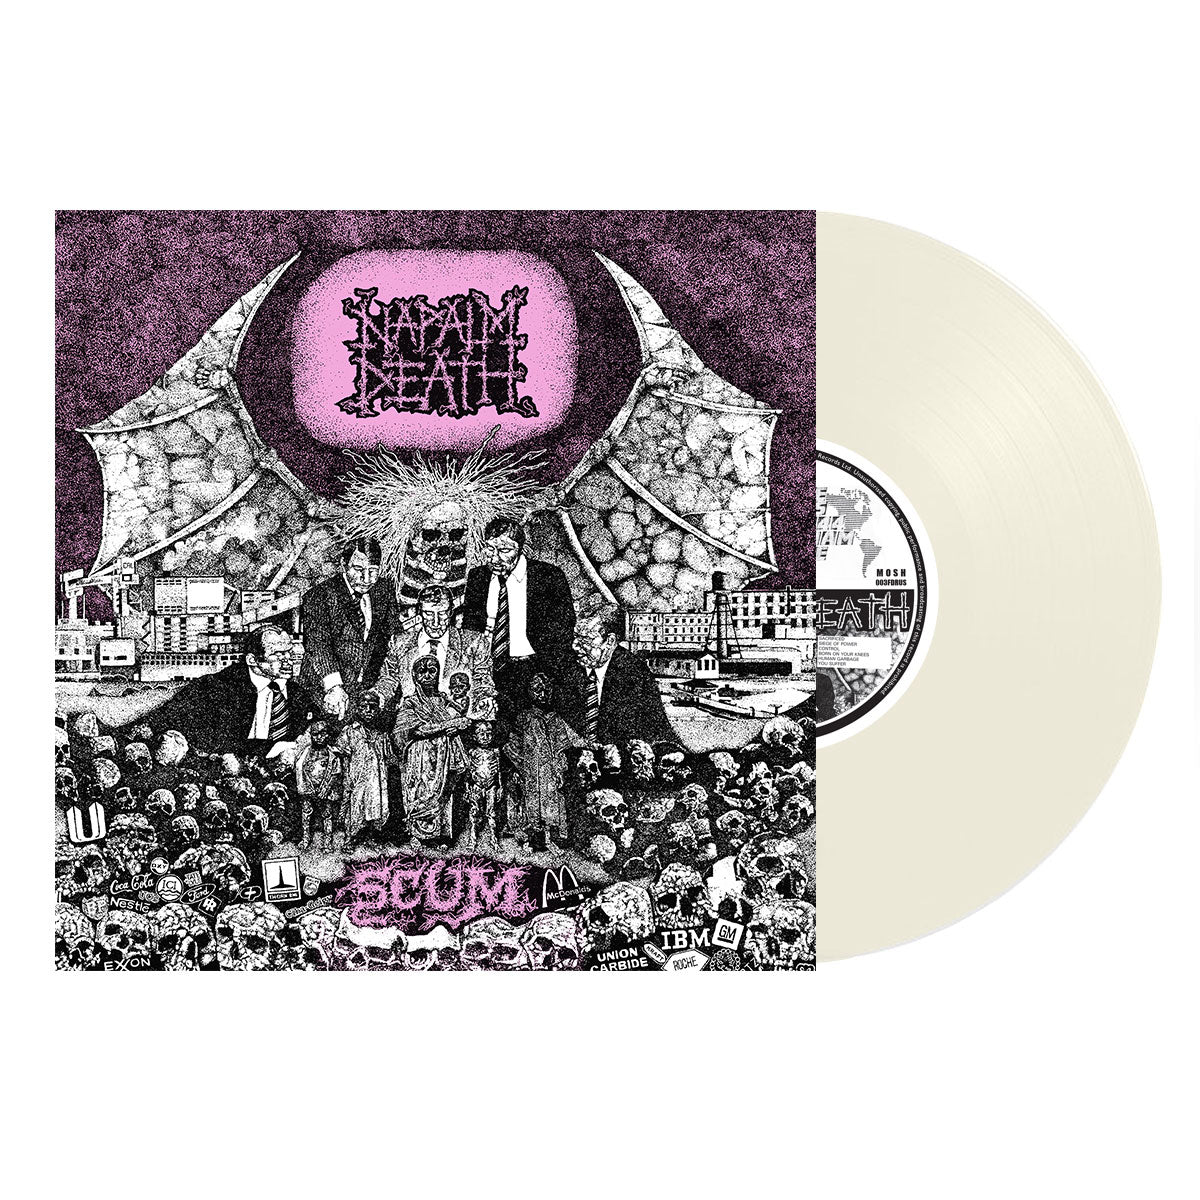 Napalm Death "Scum" FDR Milky Clear Vinyl w/ Pink Cover